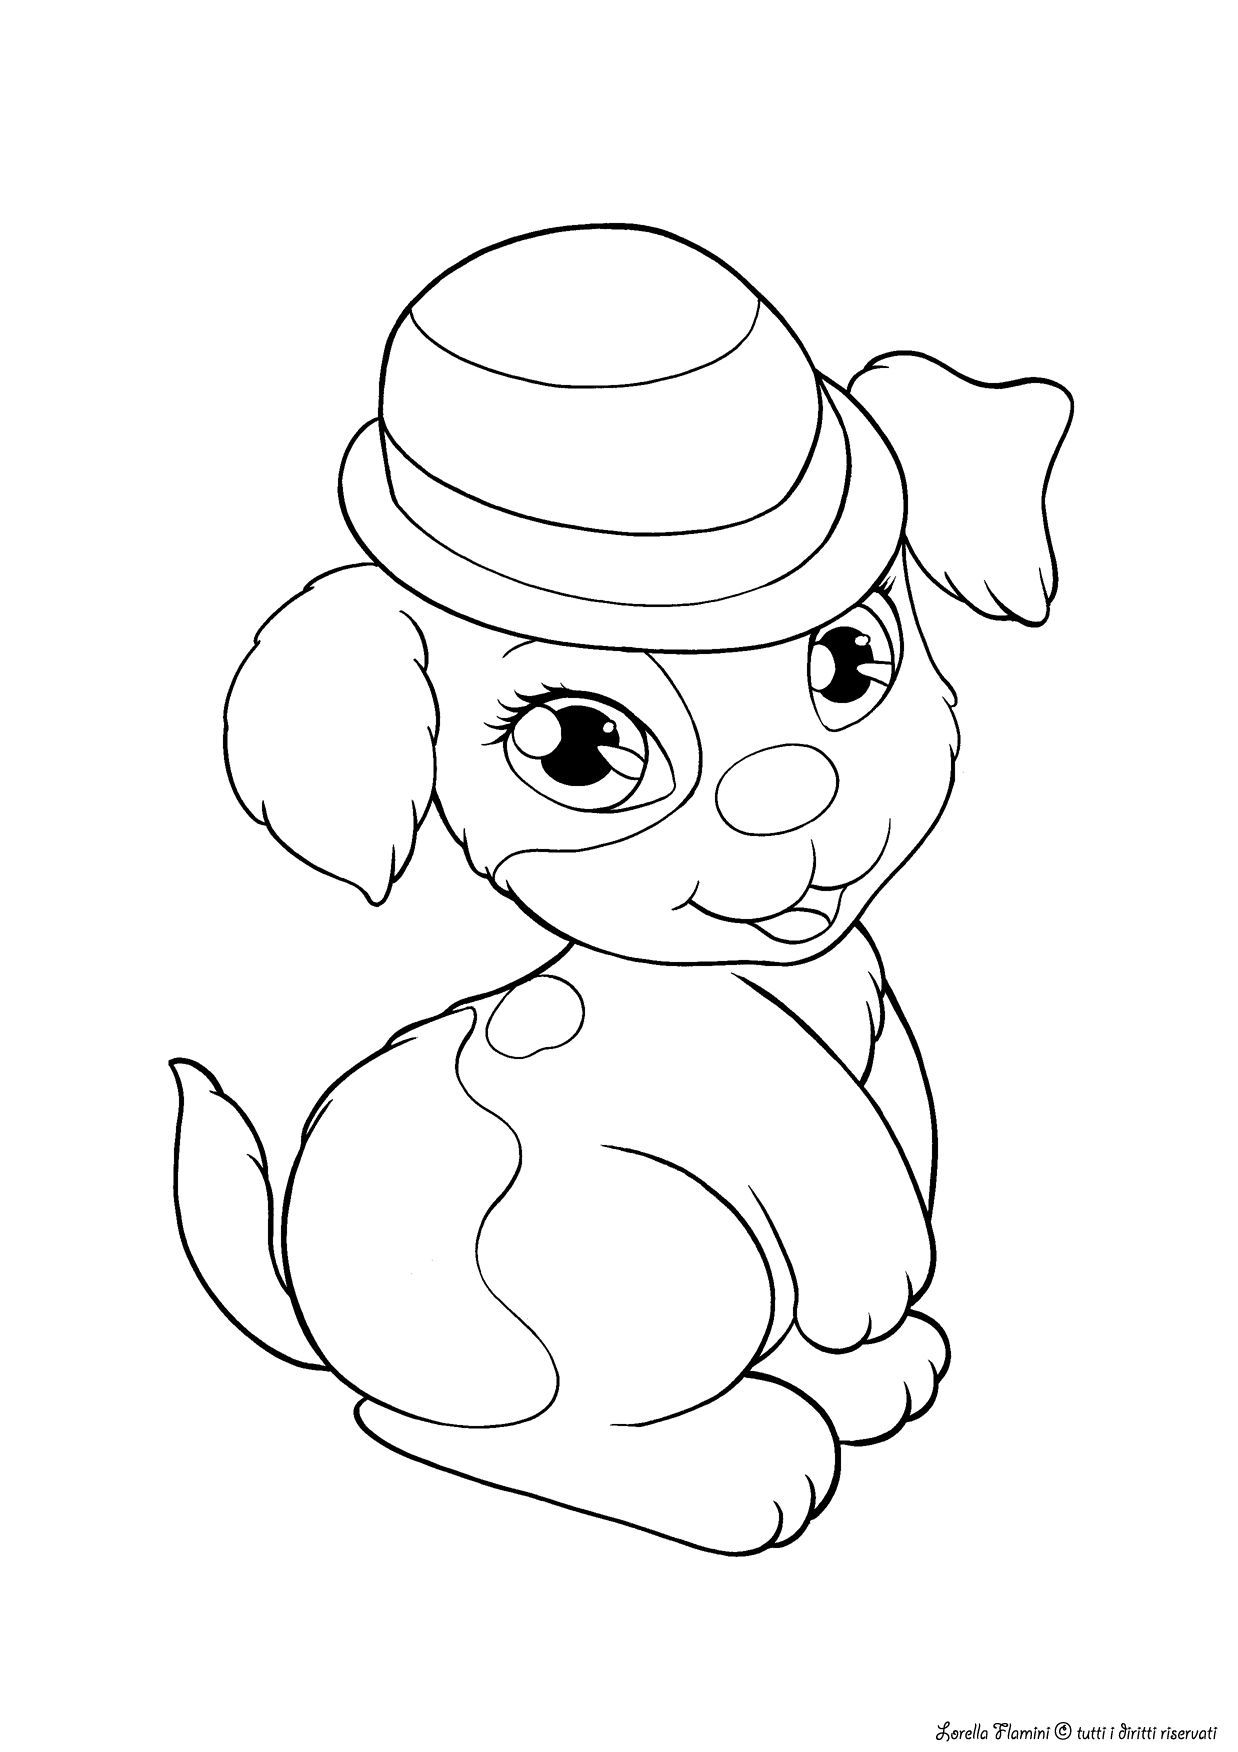 Printable Pug Coloring Pages AZ Coloring Pages, Pug Coloring Pages ...